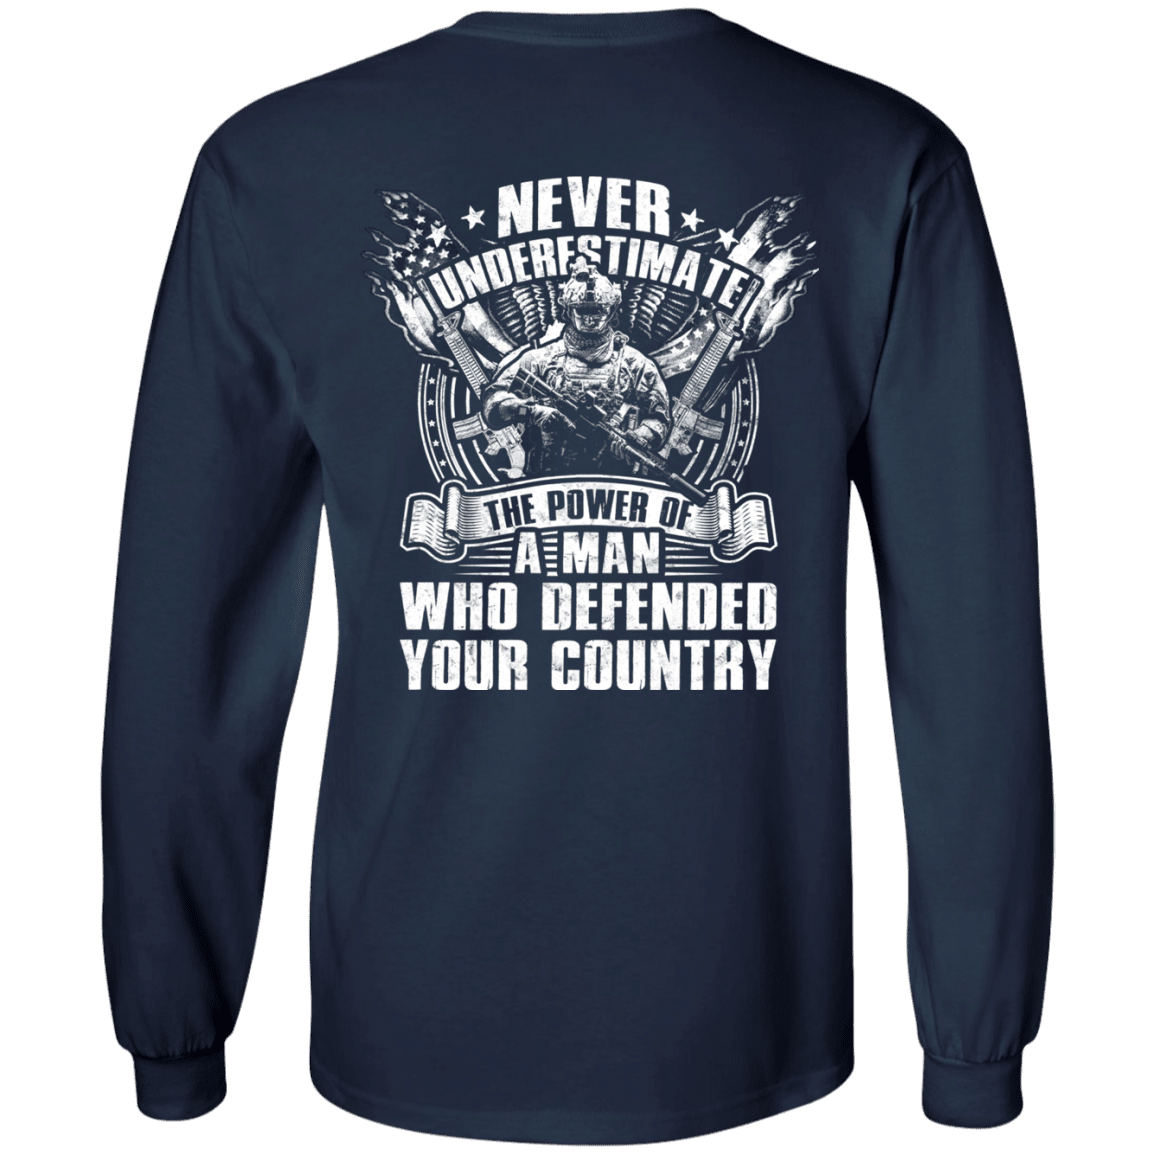 Military T-Shirt "Never Underestimate The Power of Man Defended Country" Men Back-TShirt-General-Veterans Nation